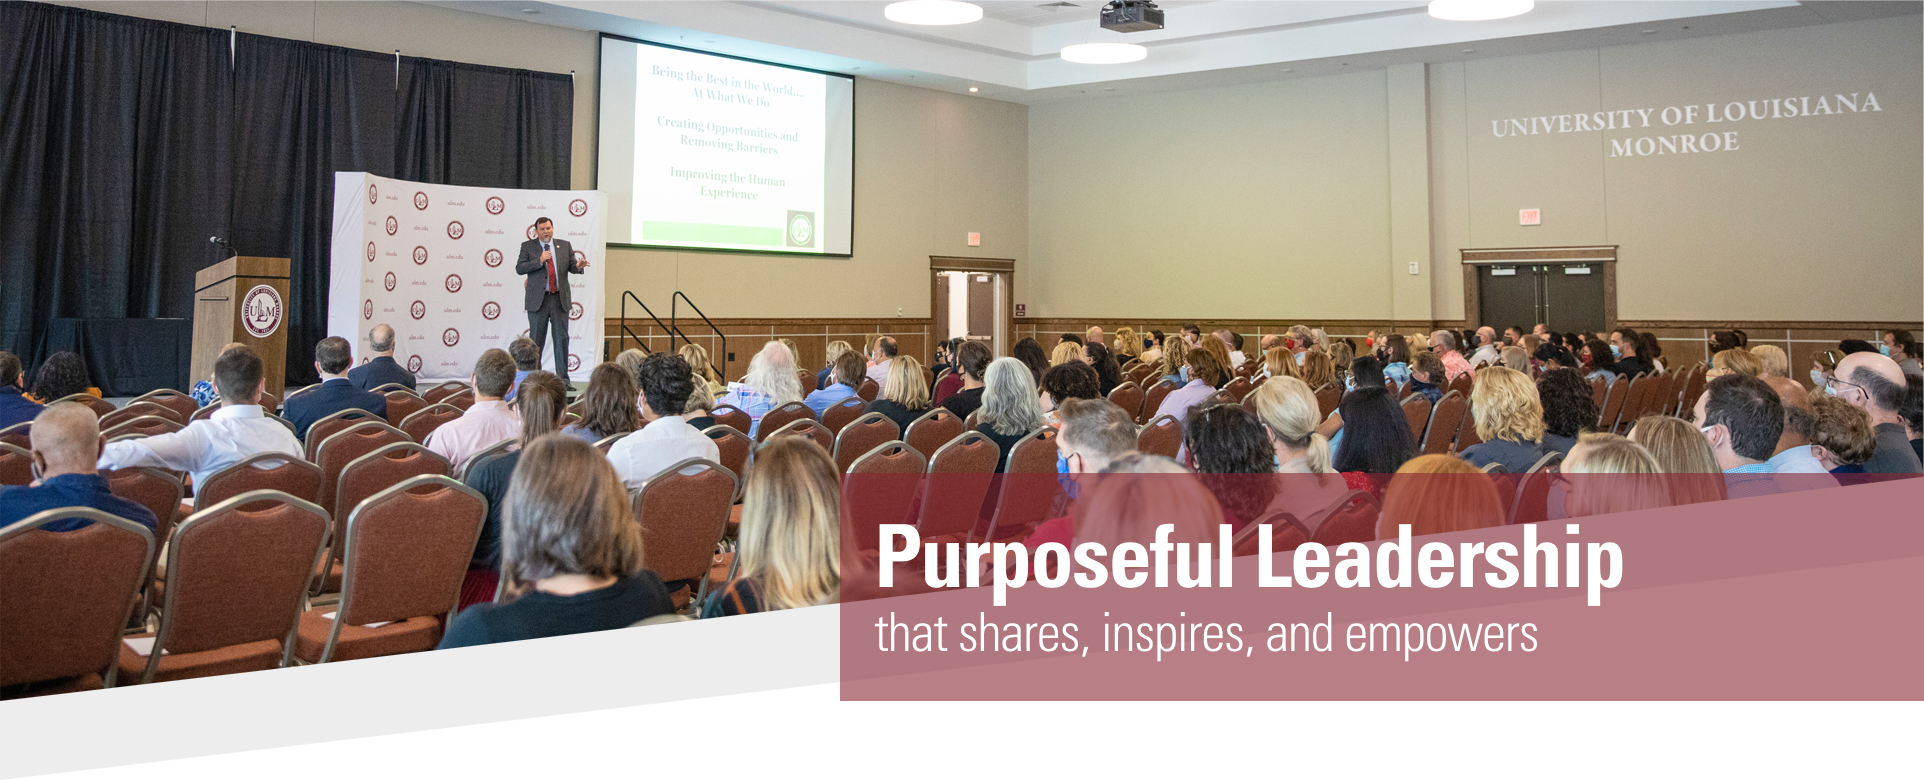 Purposeful Leadership that shares, inspires, and empowers